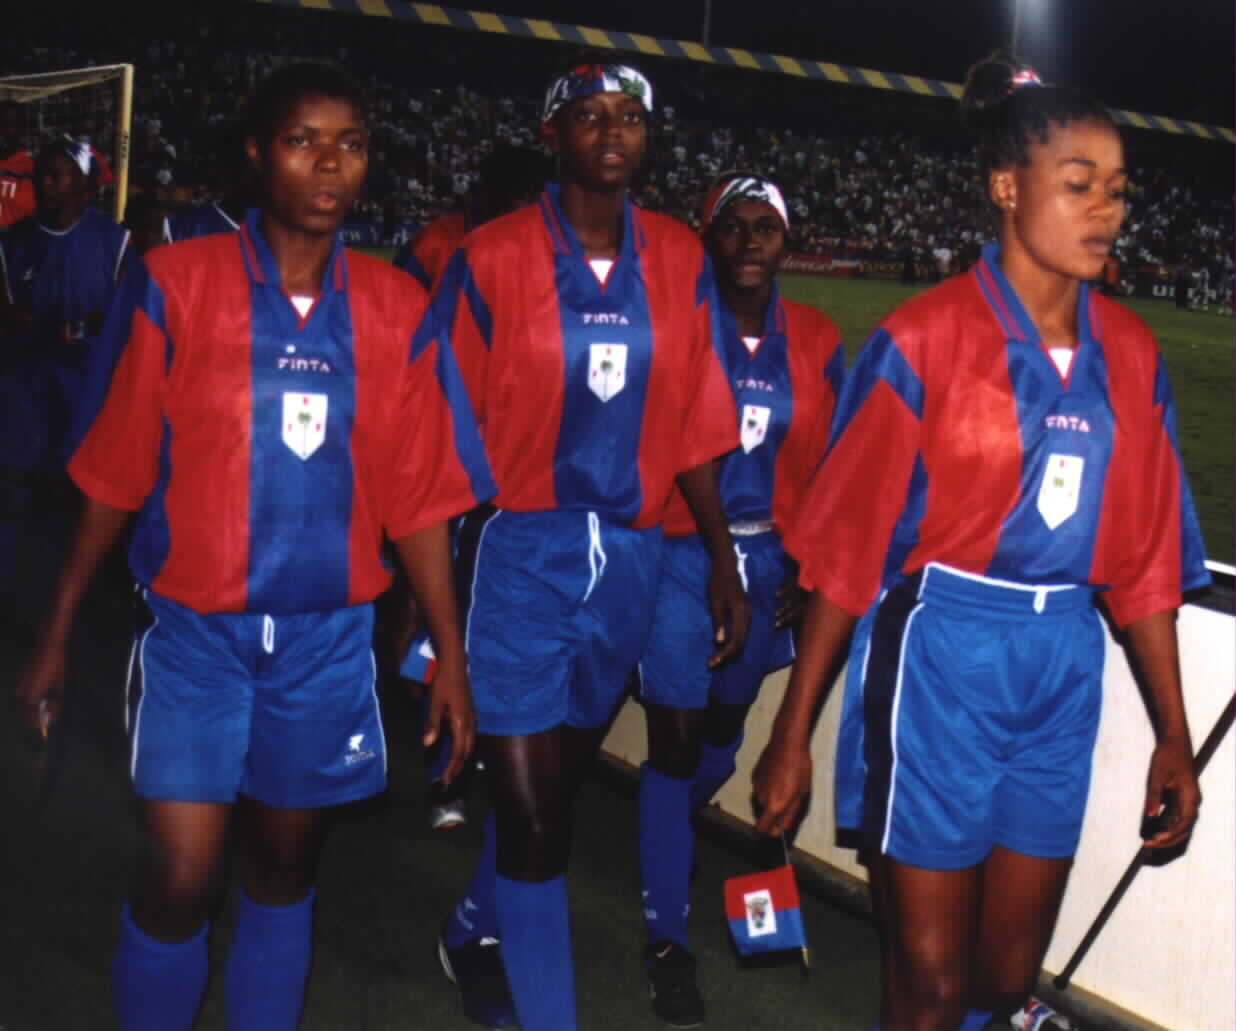 (Haitian national team making its entry on the field.)Picture courtesy of Noe Dorestant... Give credit
credit is due.